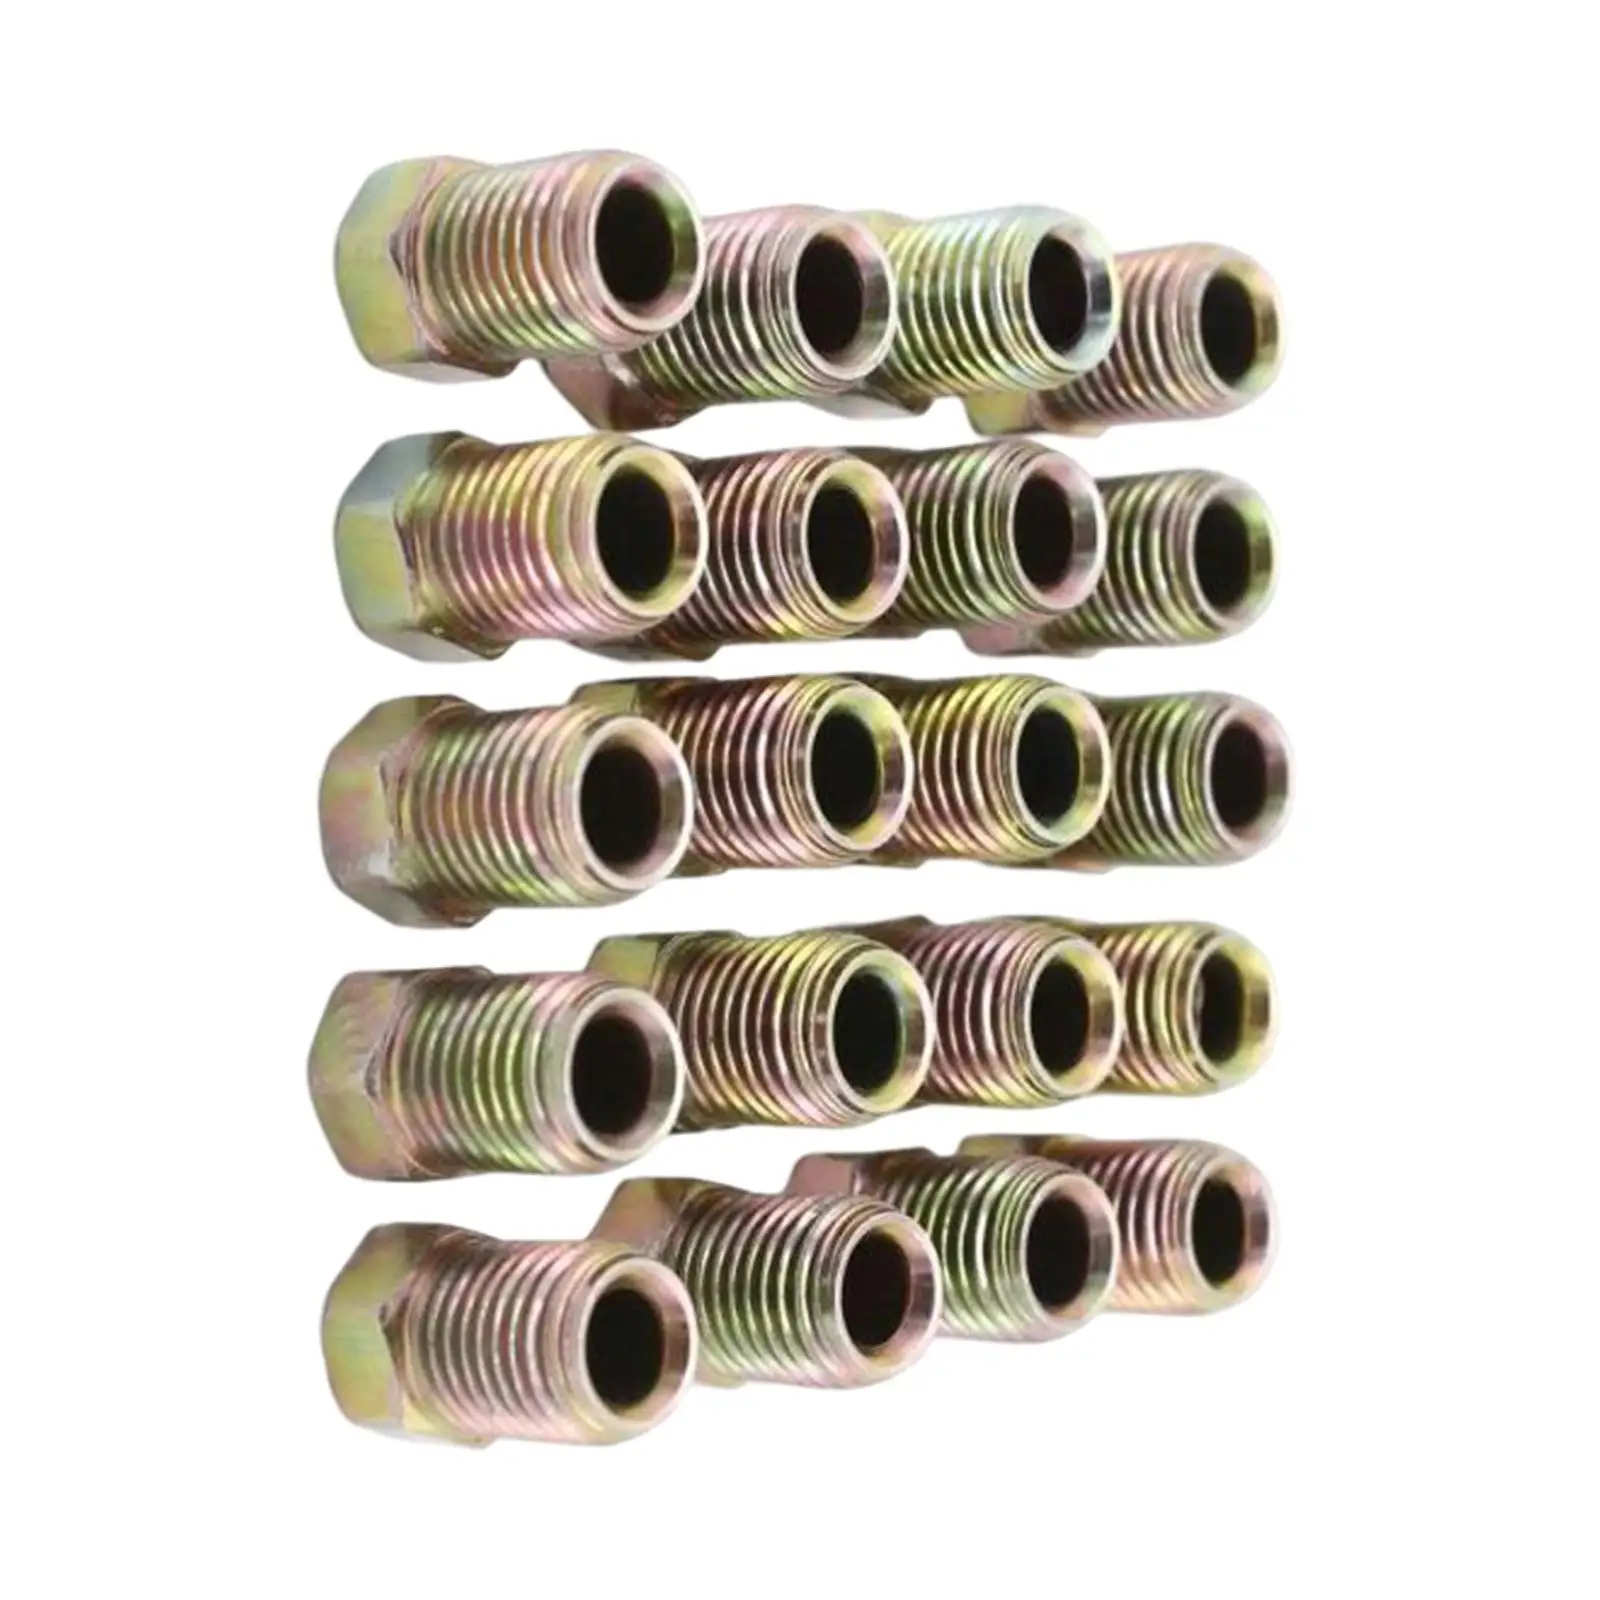 20 Pcs 3/8-24 Inverted Flare Tube Nuts Vehicle Parts Fit for 3/16 inch Tube